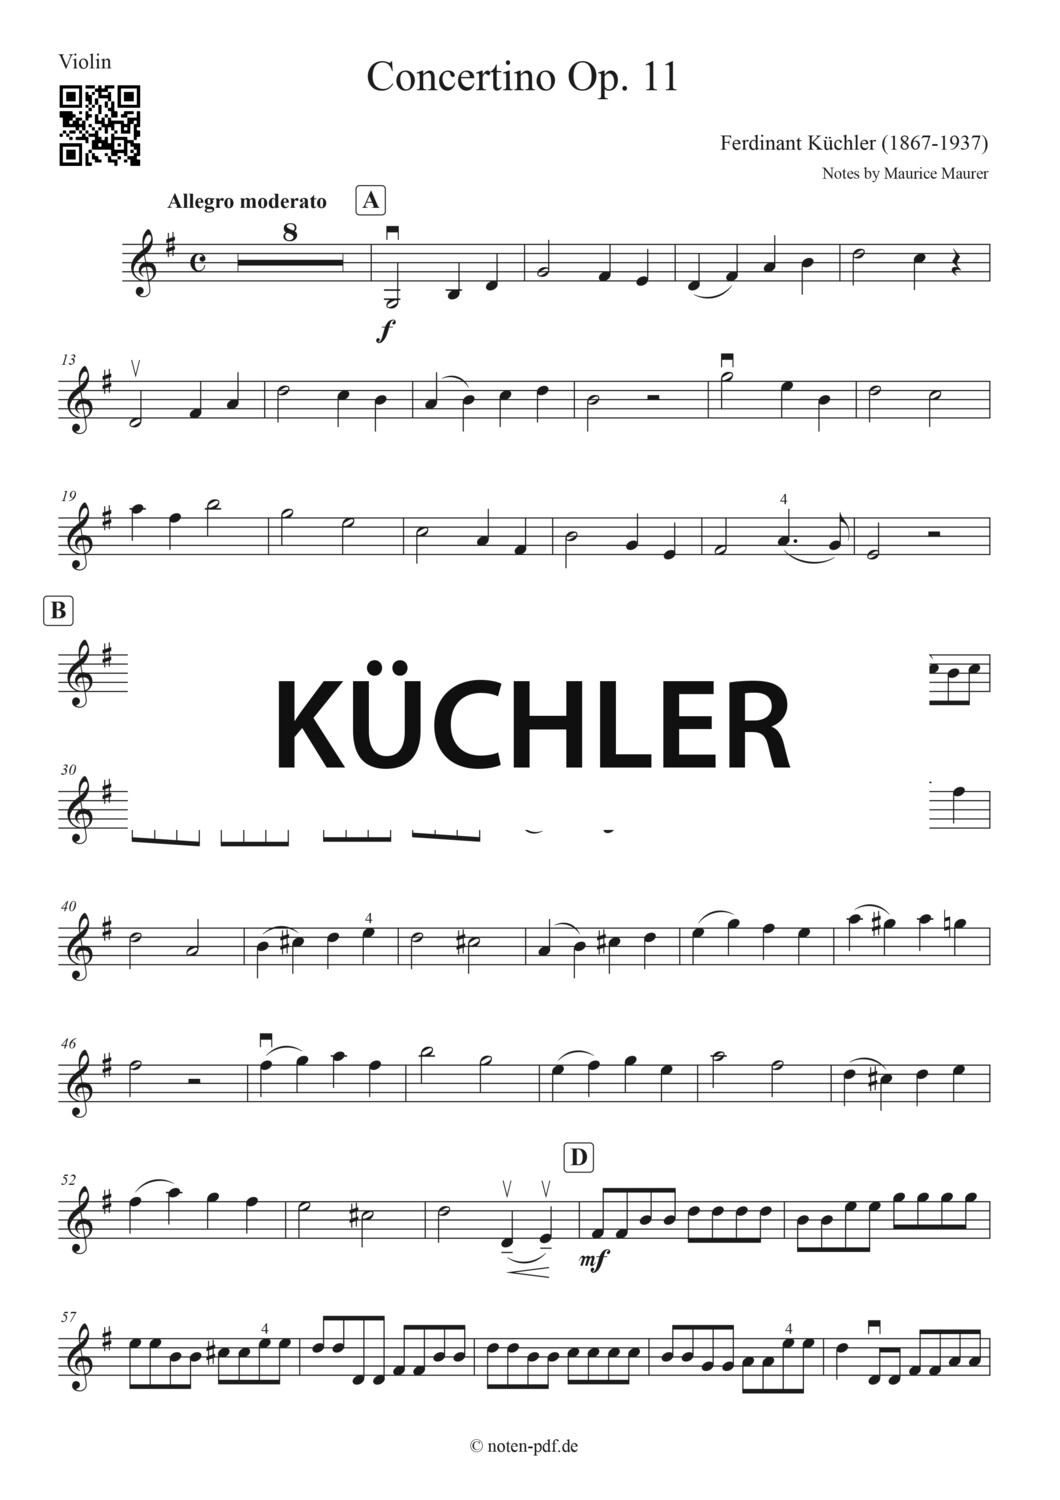 Küchler: Concertino Op. 11 - All Movements